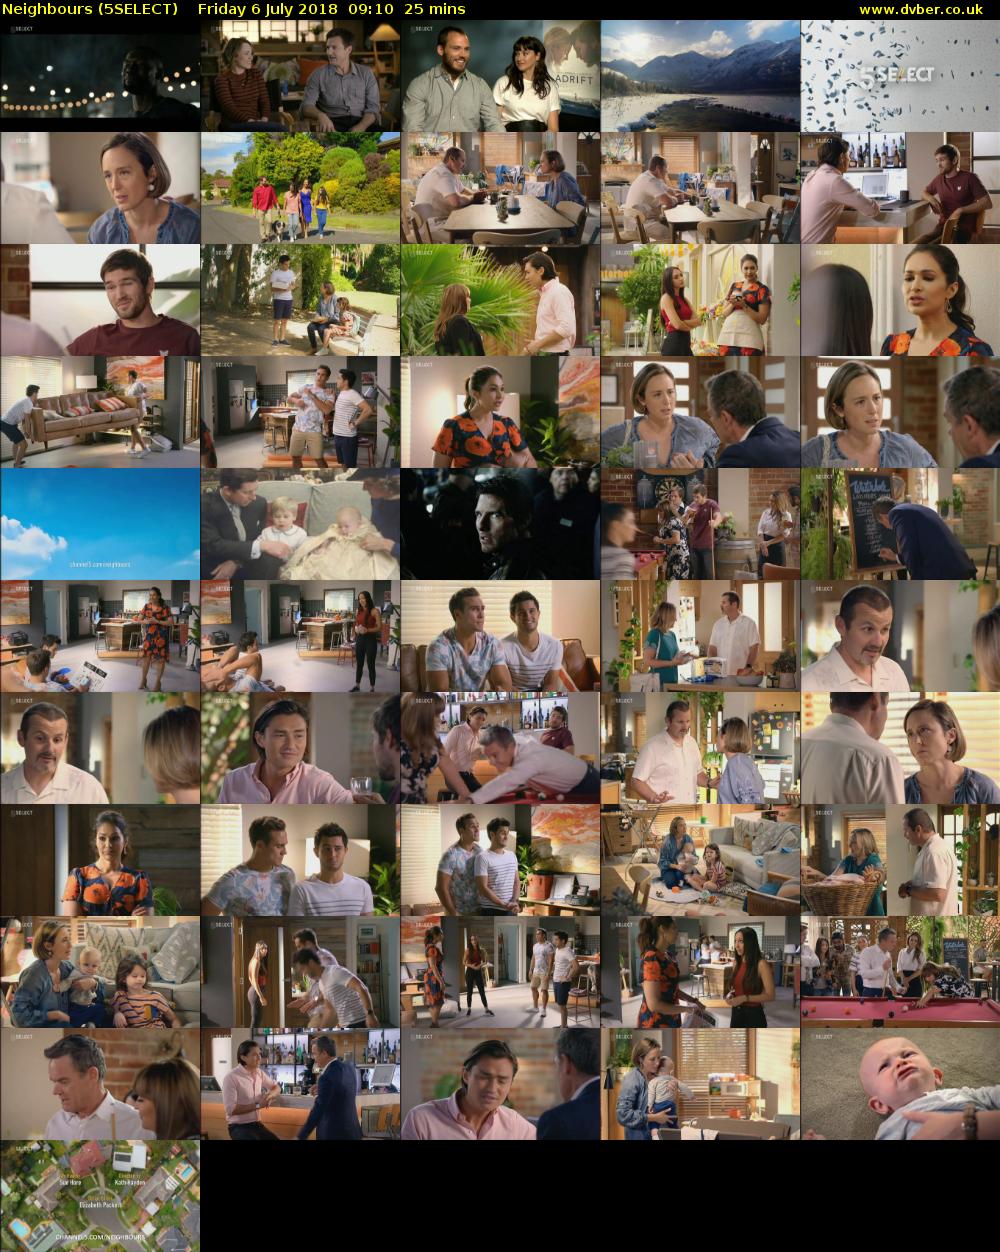 Neighbours (5SELECT) Friday 6 July 2018 09:10 - 09:35